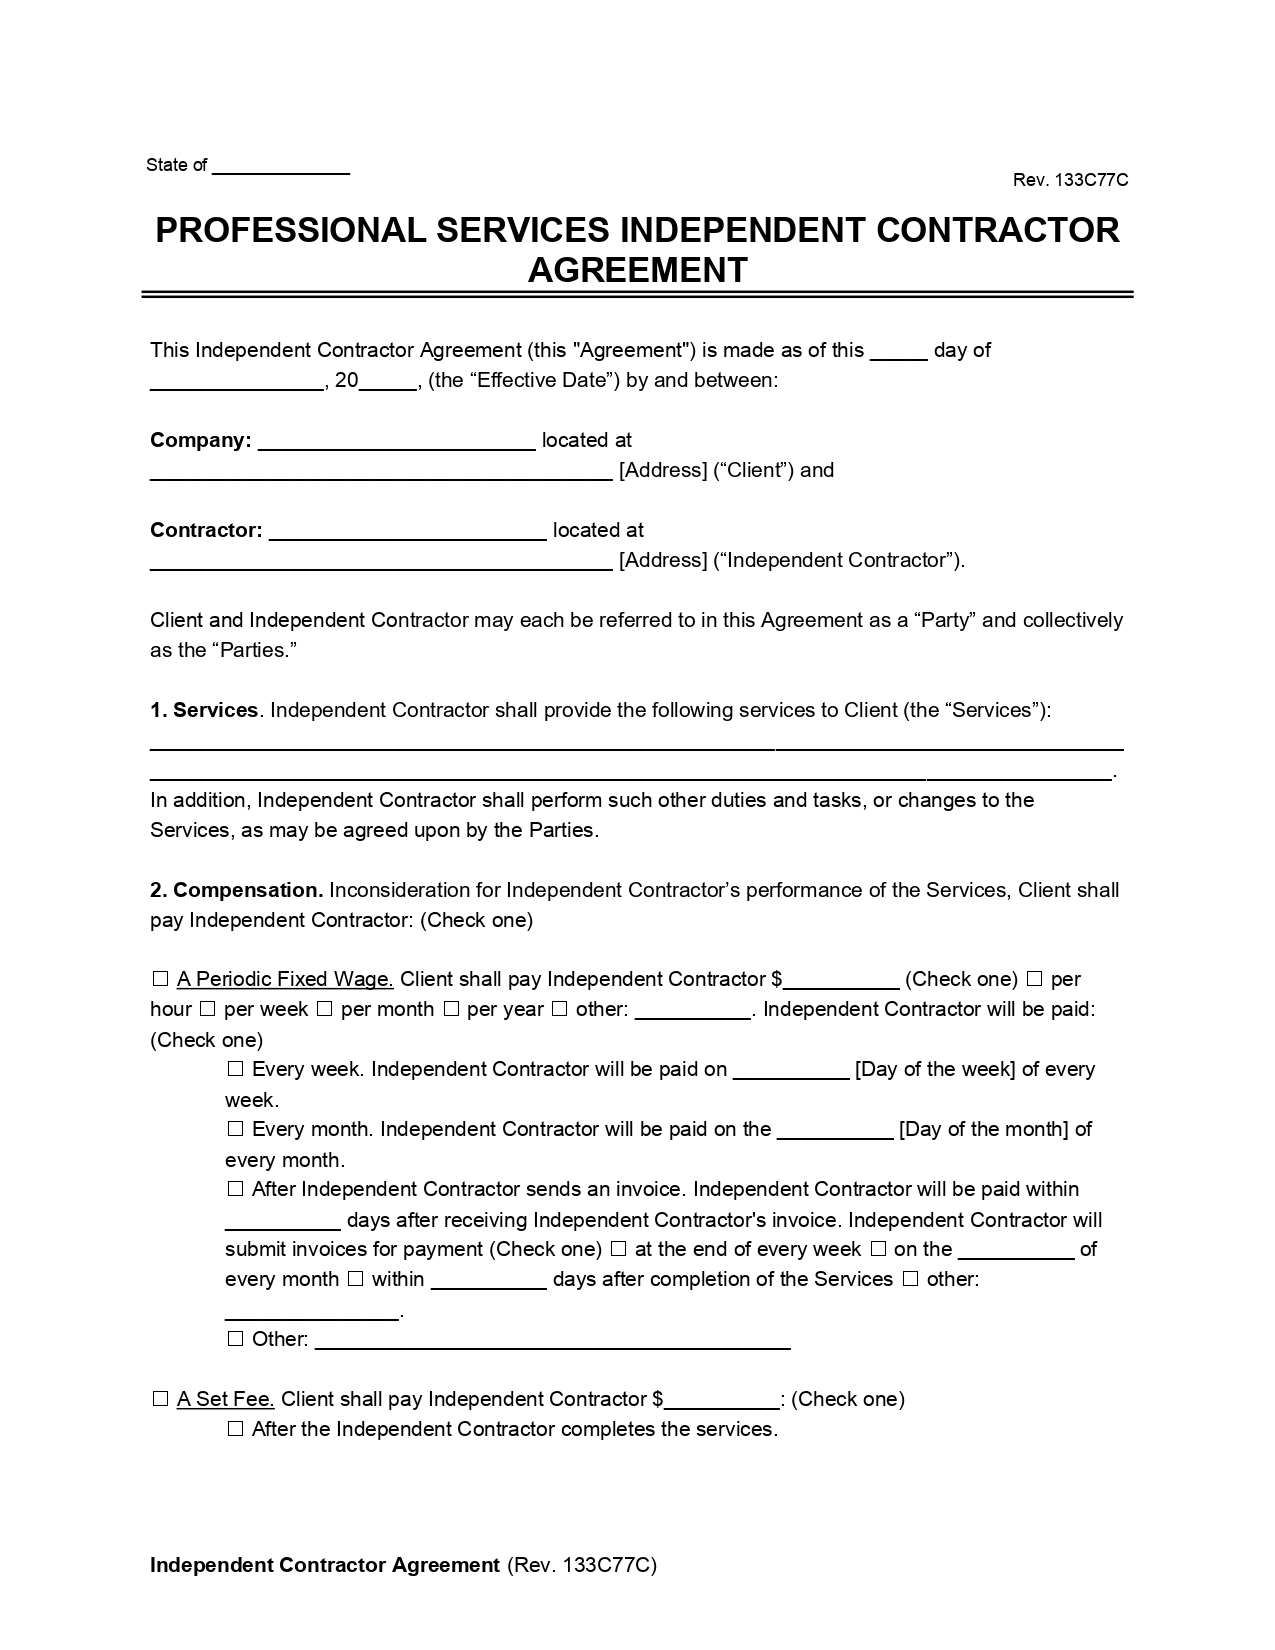 Professional Services Independent Contractor Agreement